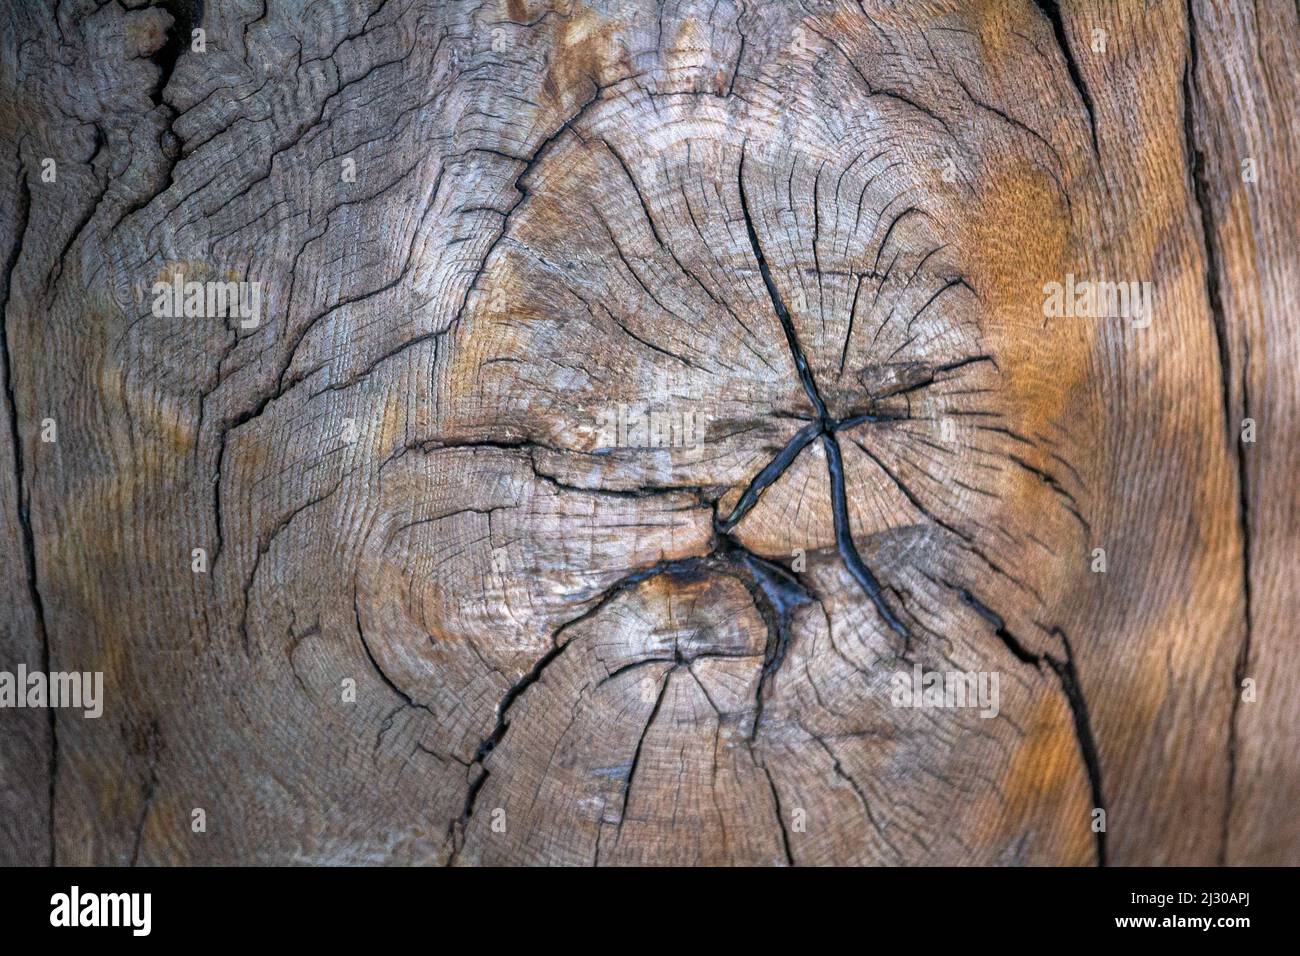 Polished cut structure of a large tree. Stock Photo